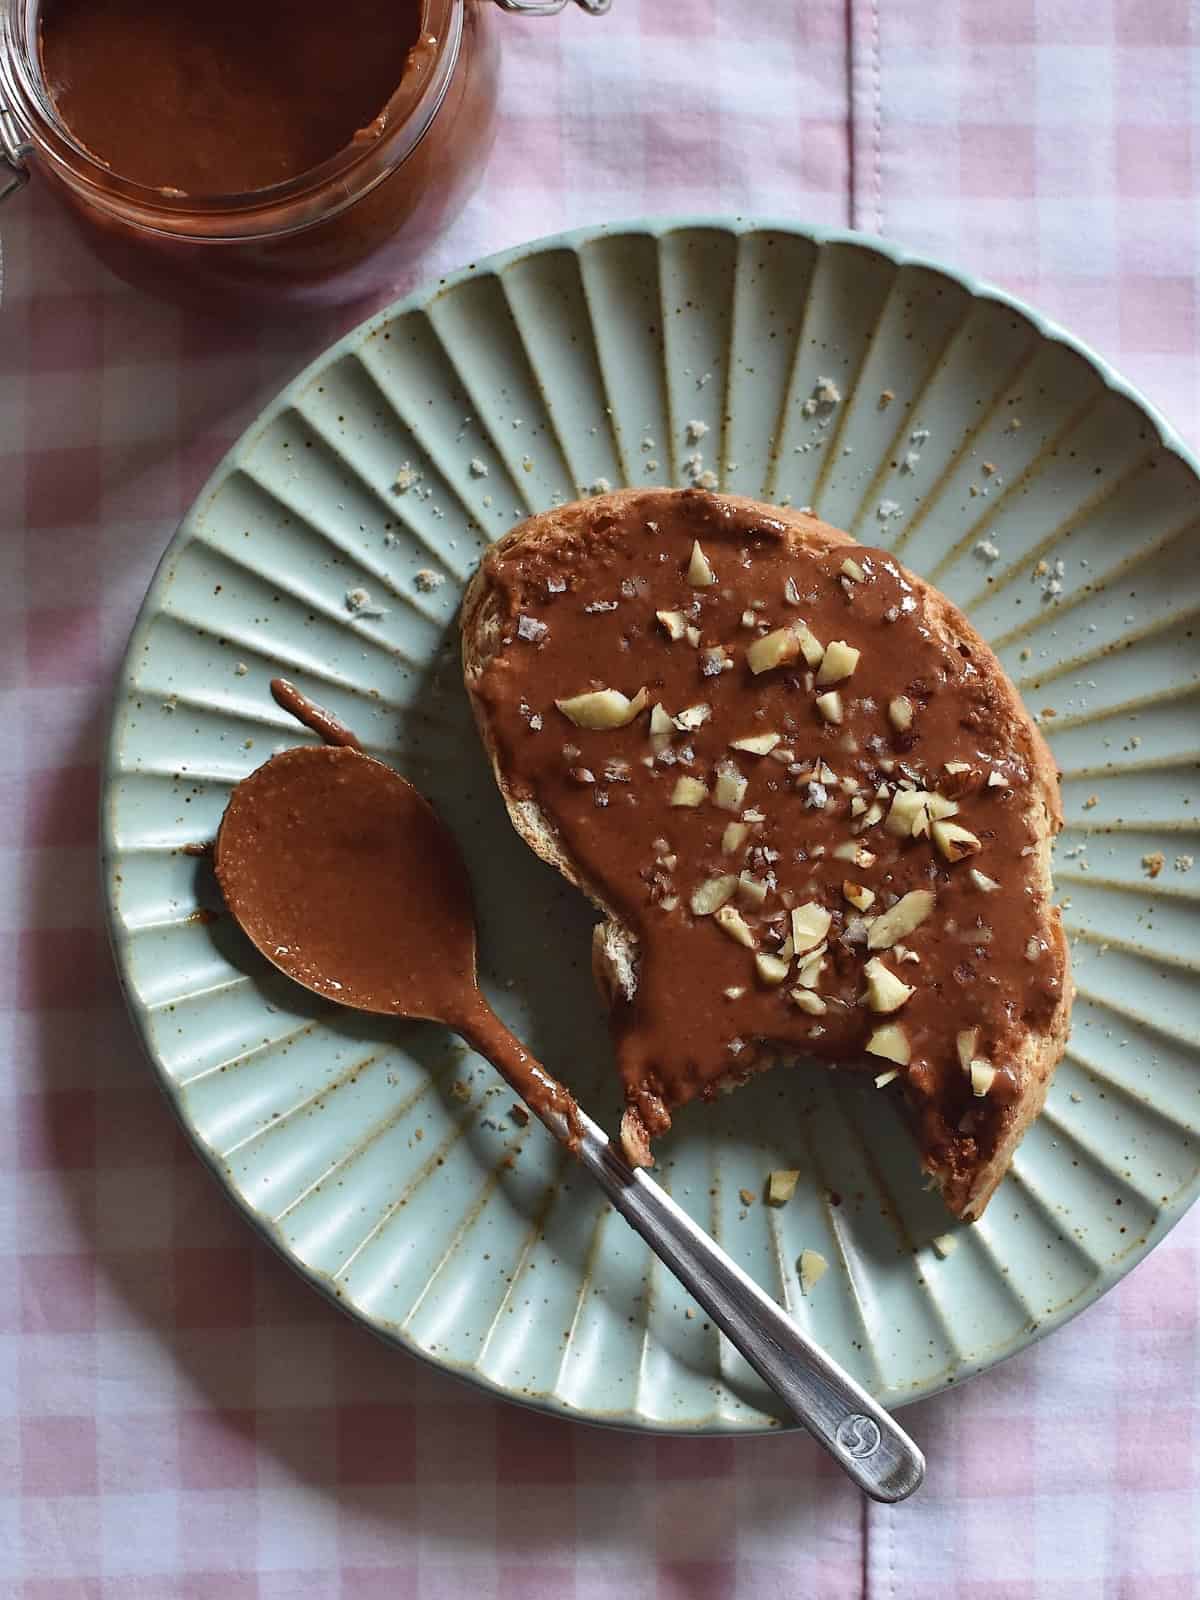 Gianduja on top of a sliced bread topped with crushed nuts.